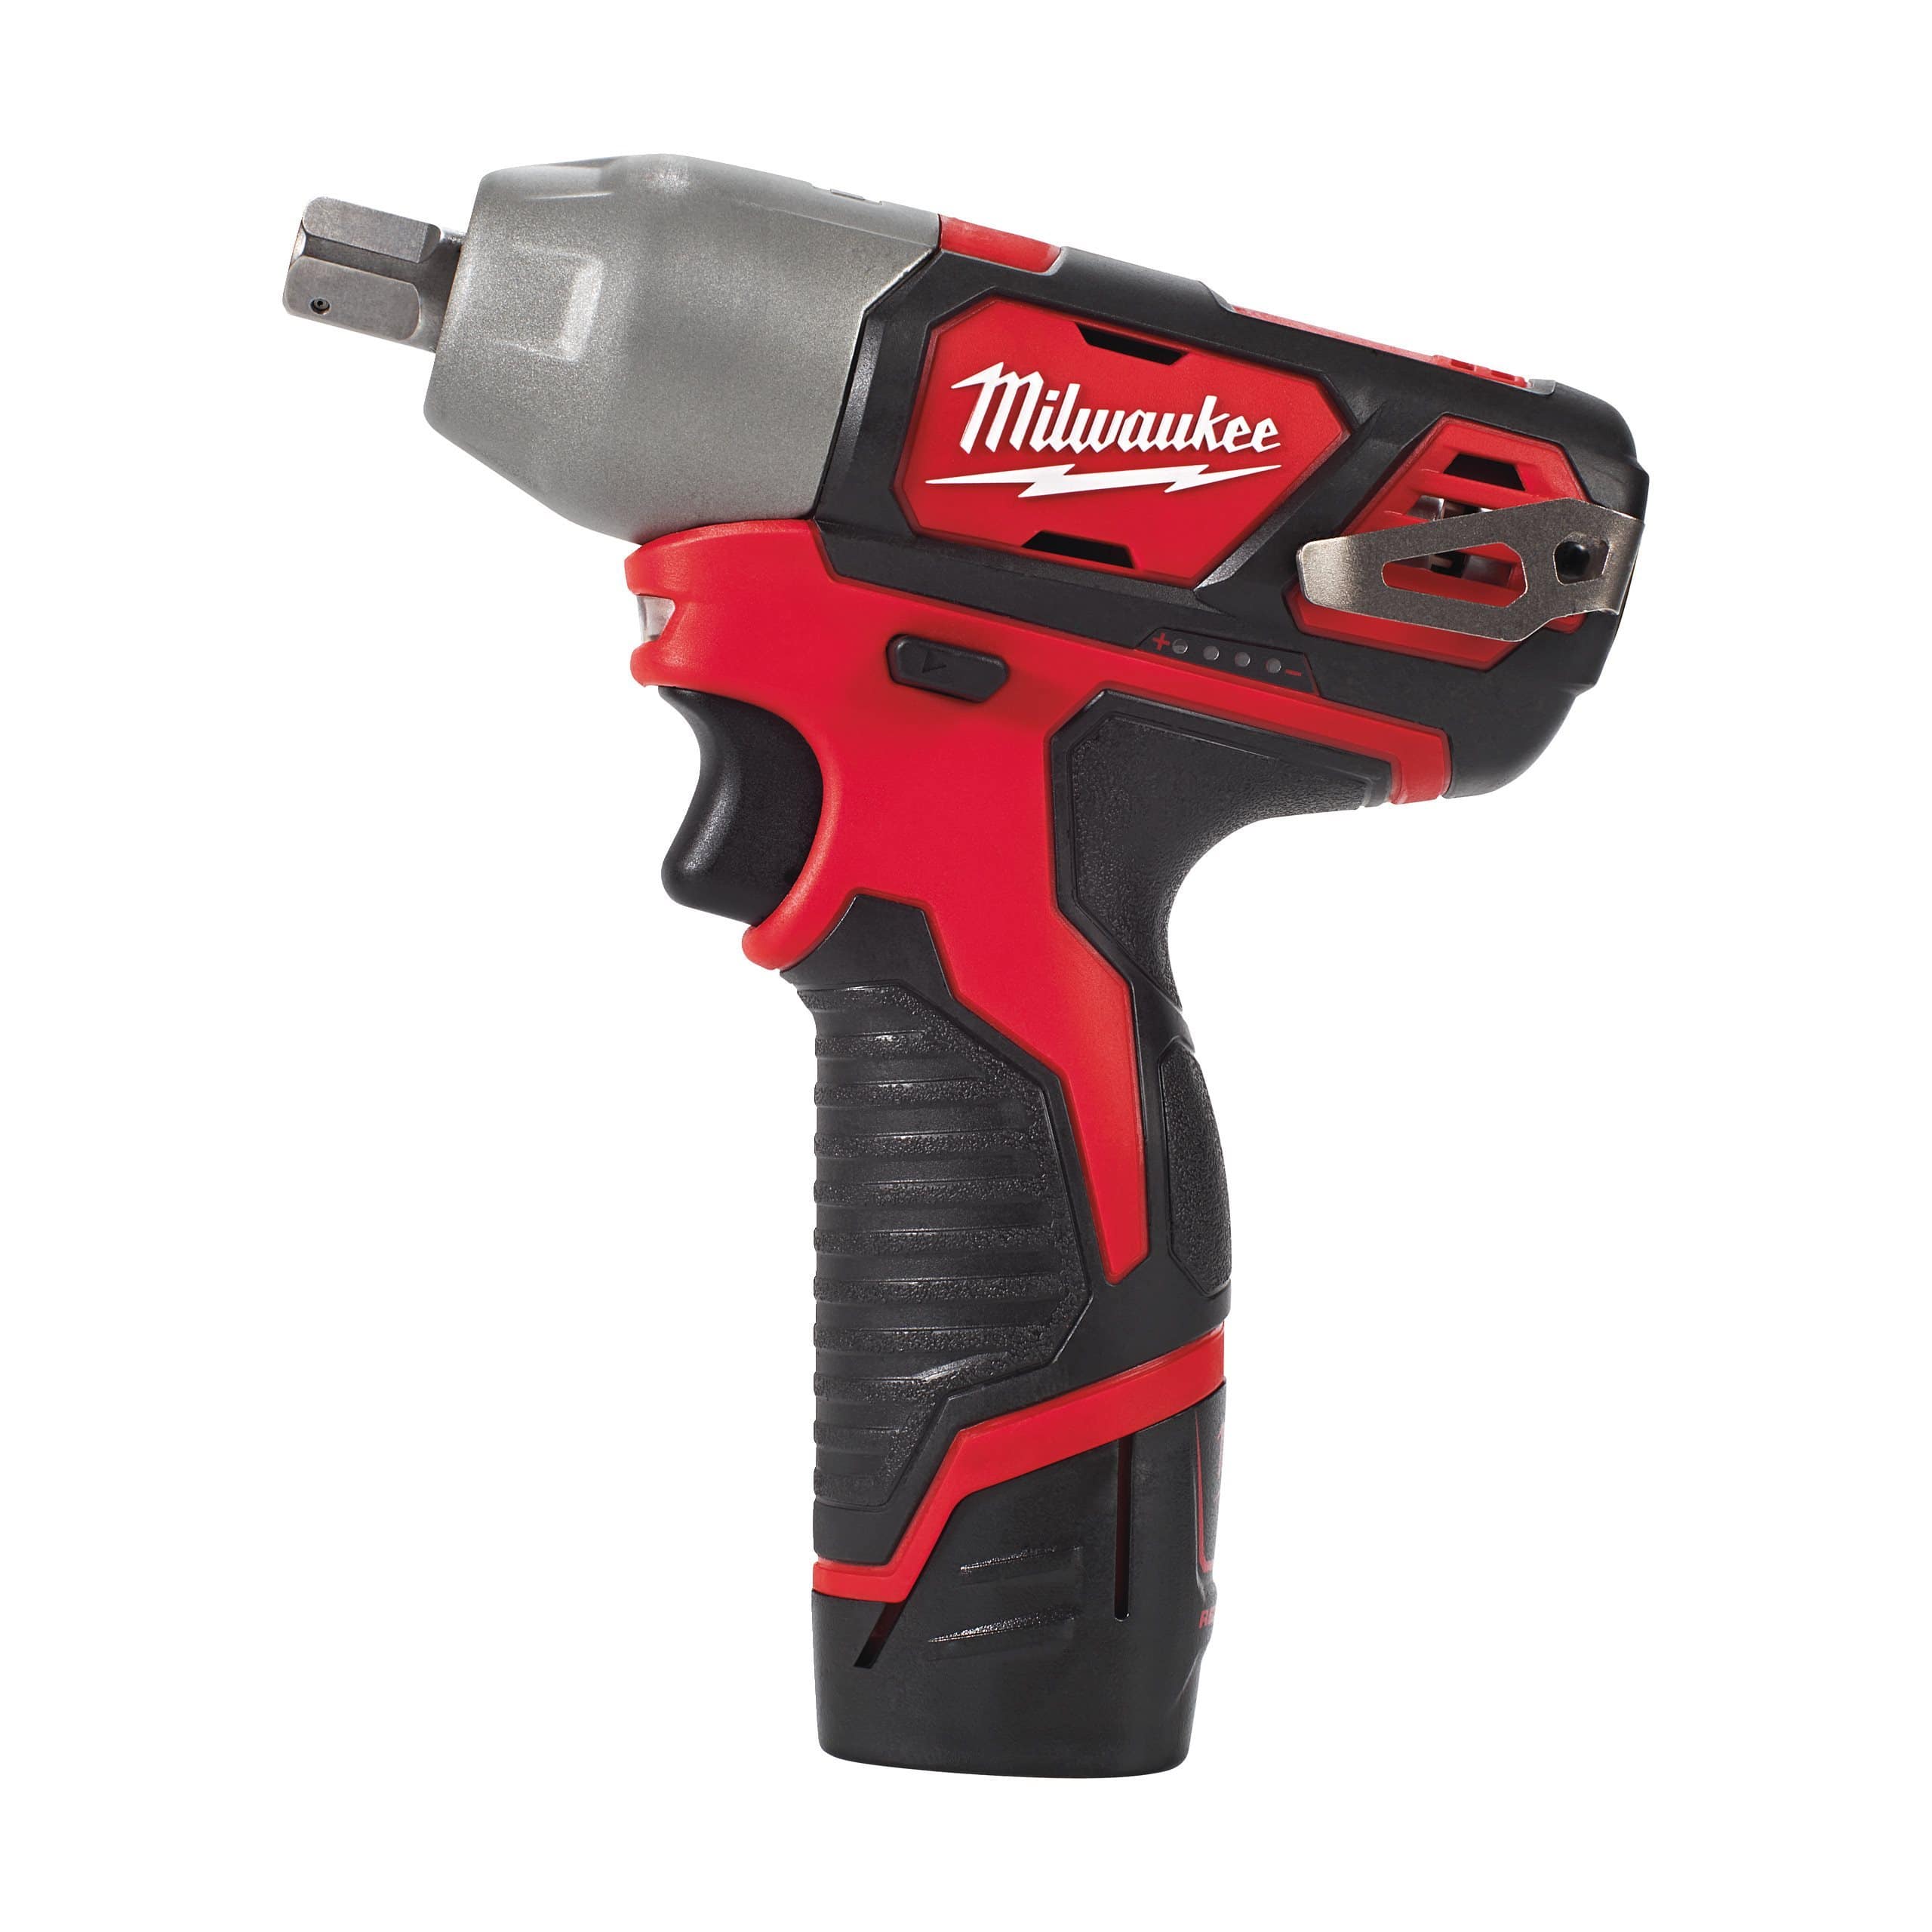 Milwaukee M12™ Cordless Sub Compact ½″ Impact Wrench 12V - M12 BIW12-0 | Supply Master | Accra, Ghana Tools Building Steel Engineering Hardware tool